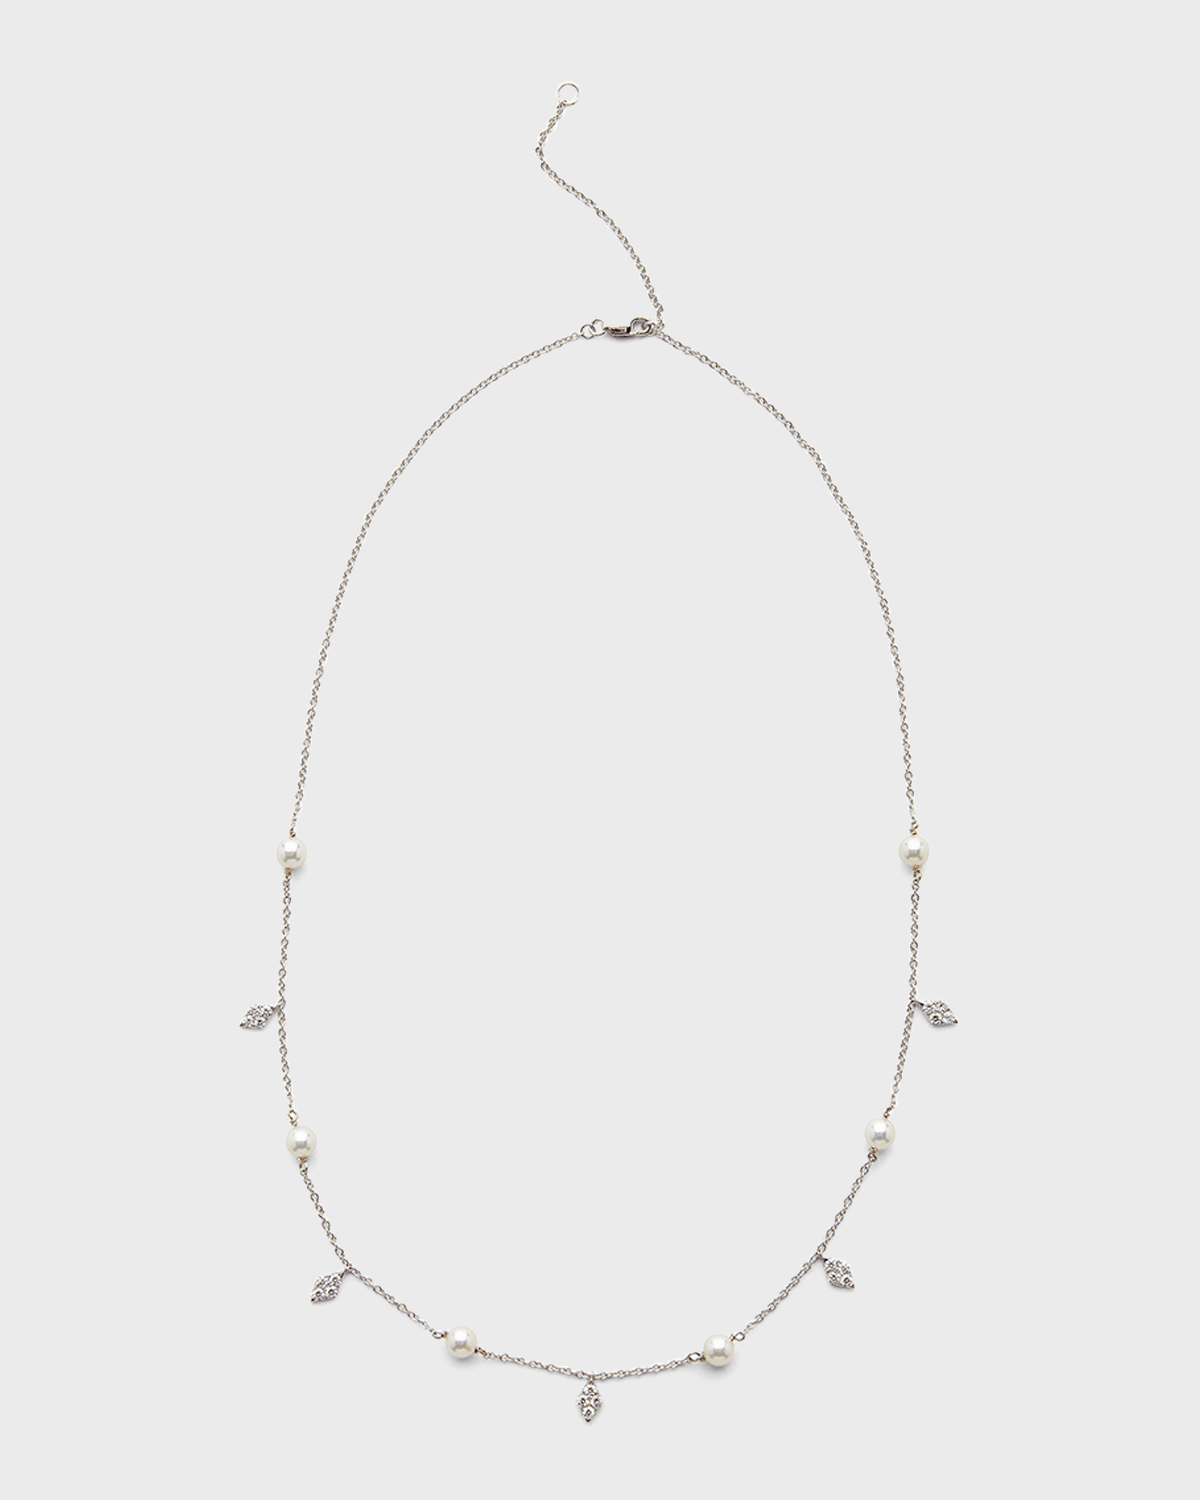 18K White Gold 8.5mm White Akoya Pearl and Diamond Necklace, 18"L